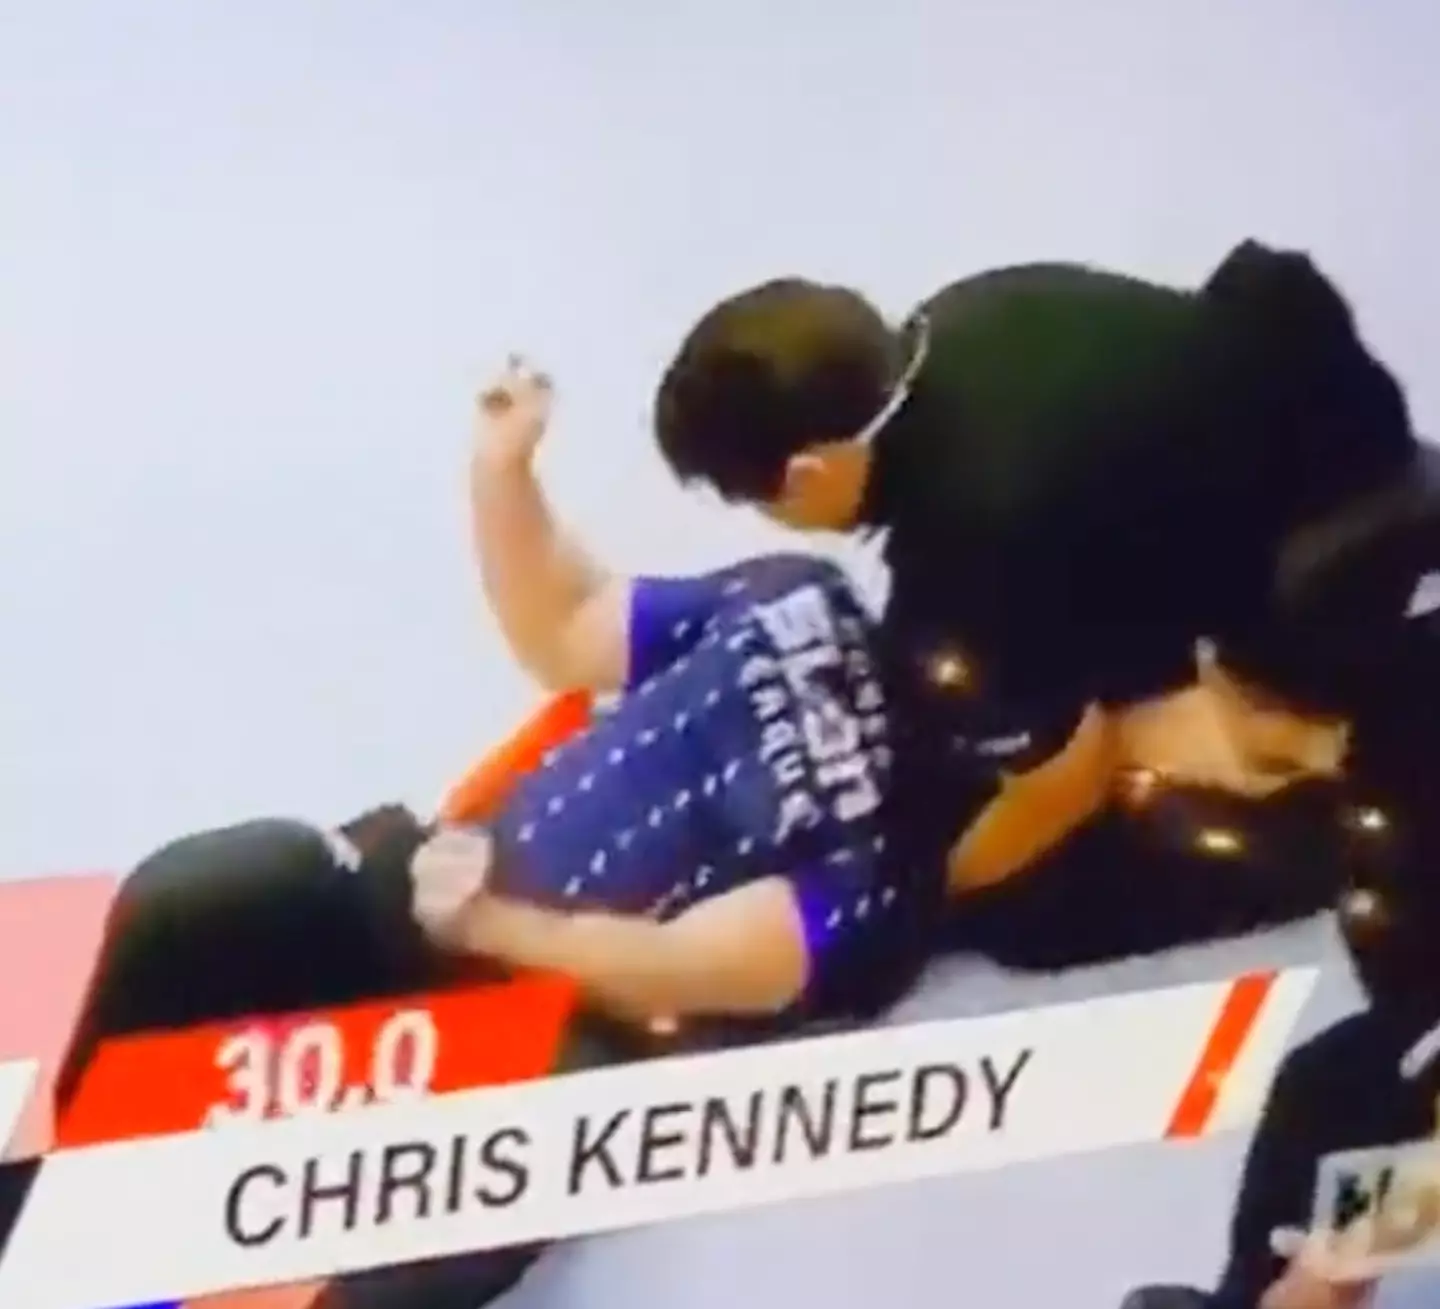 Medics raced over to make sure Chris Kennedy was alright.